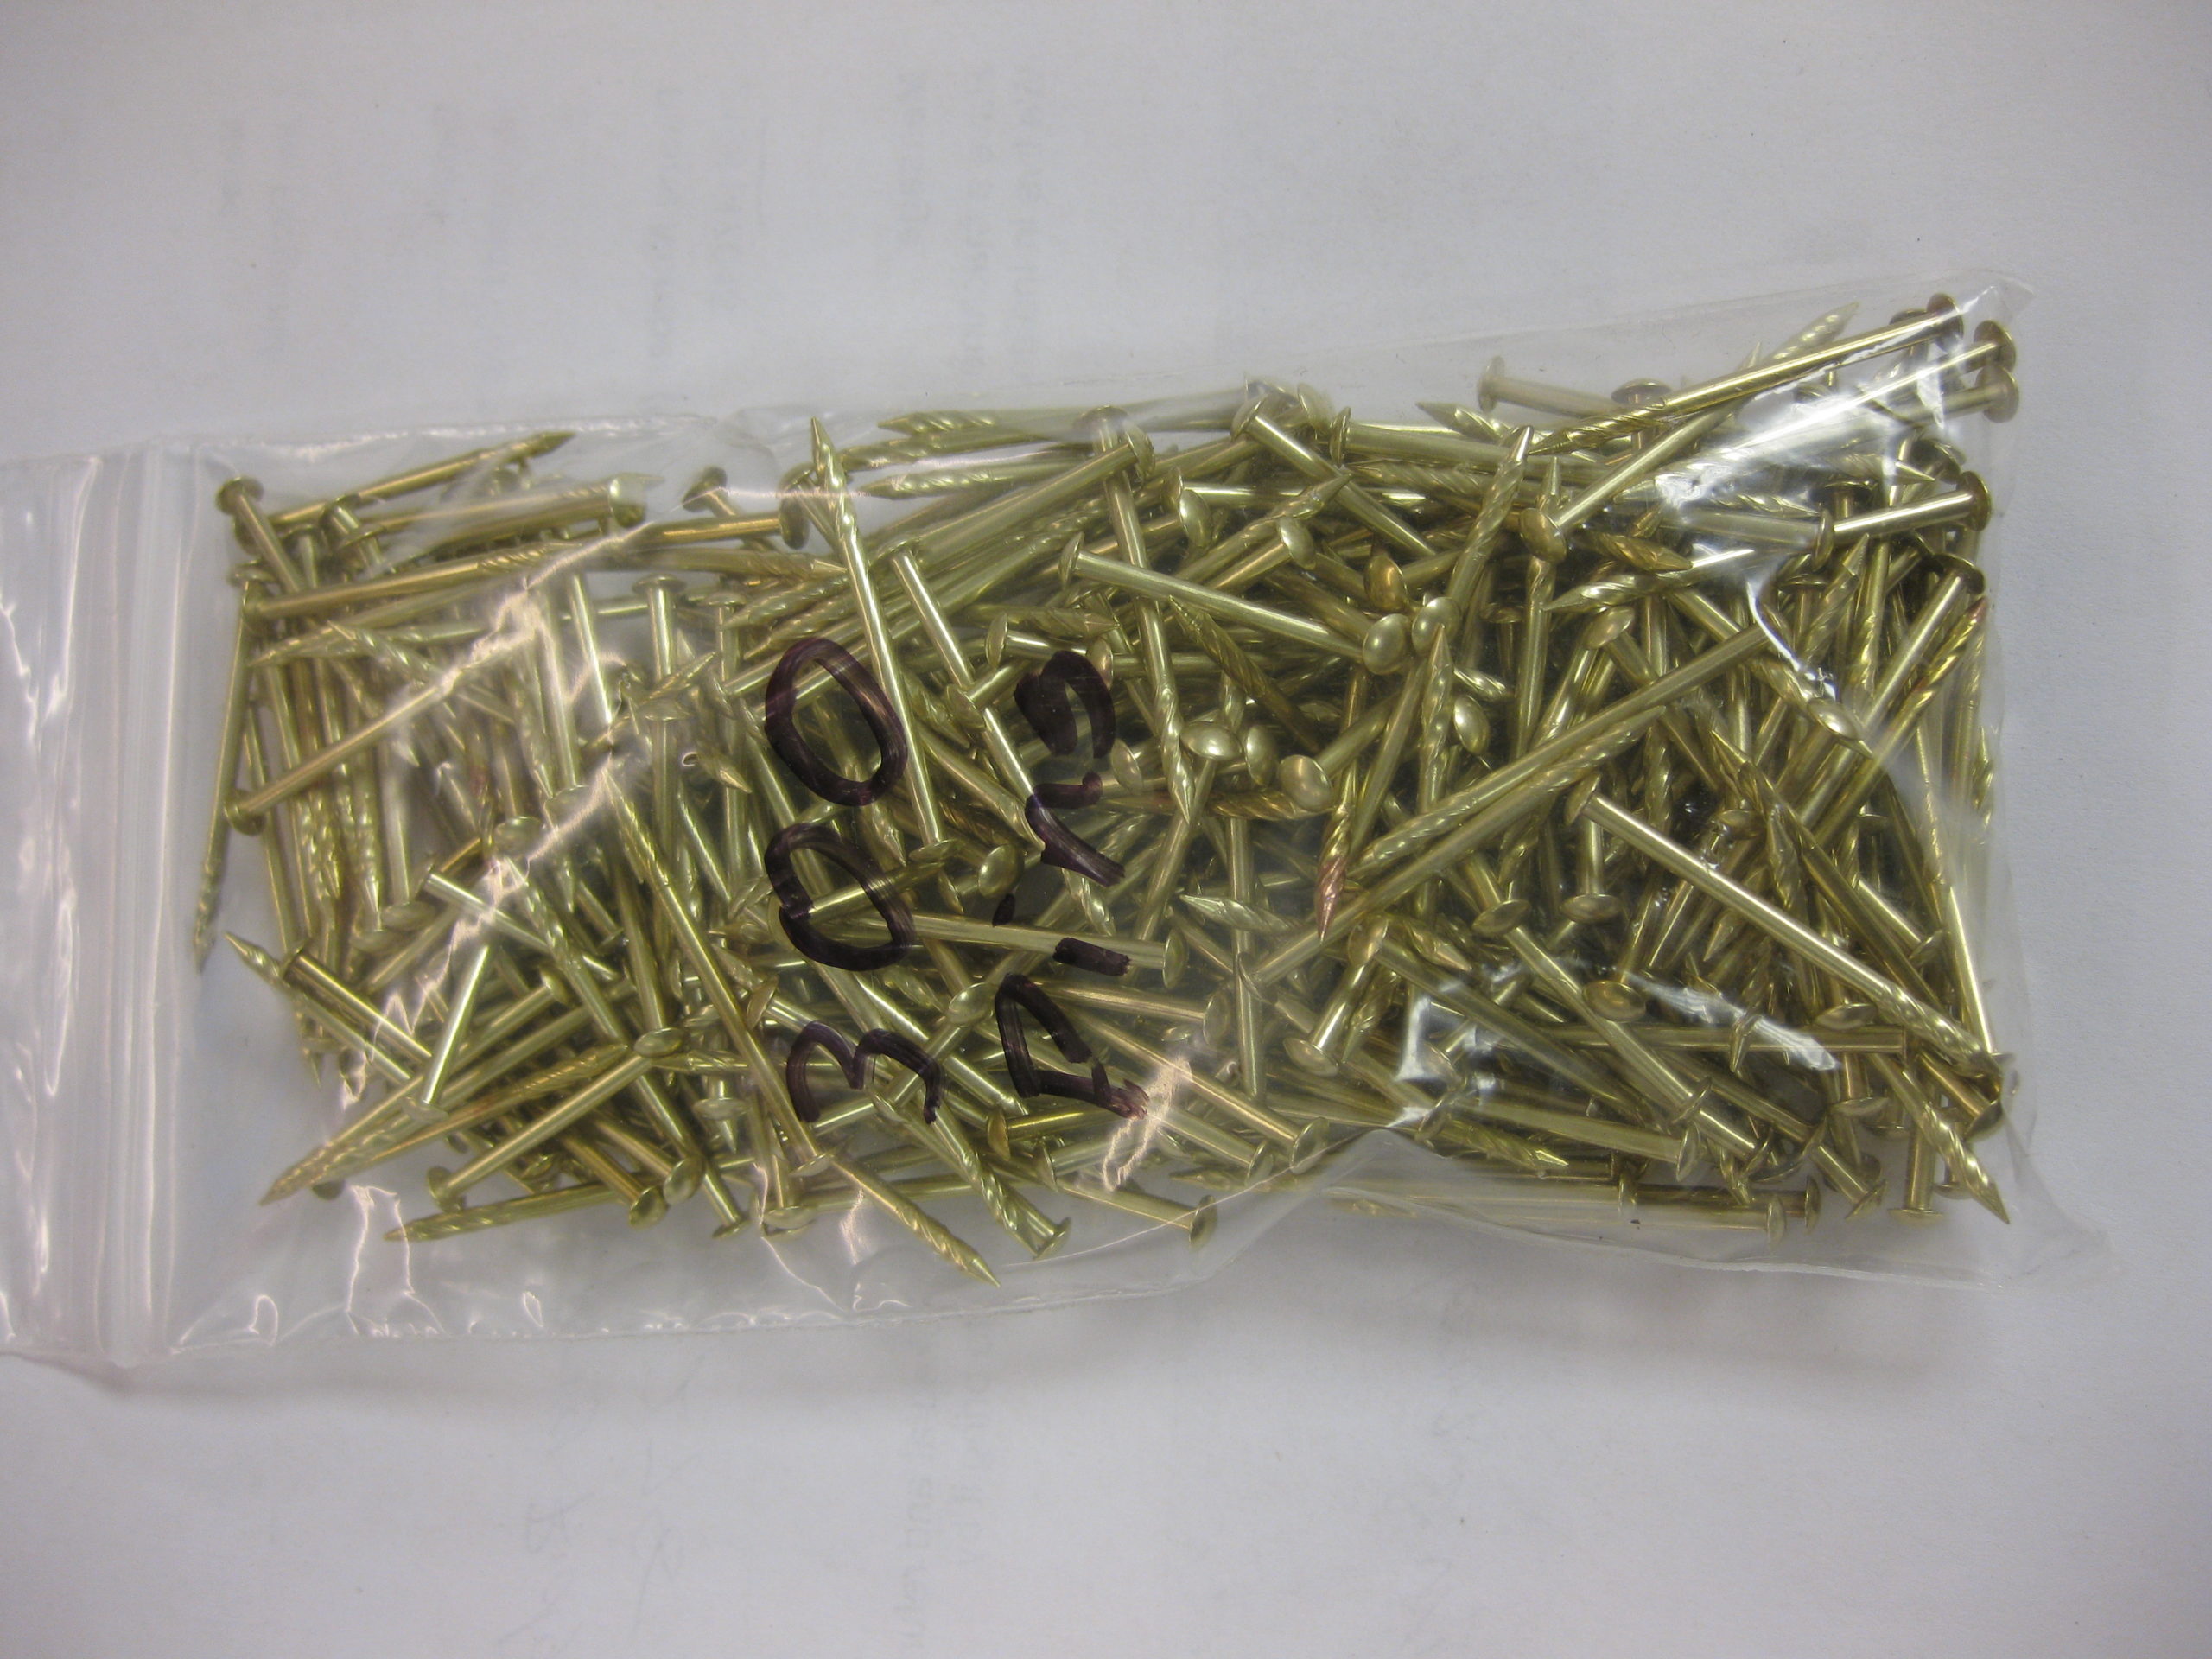 150 Used Playfield Pins- Polished